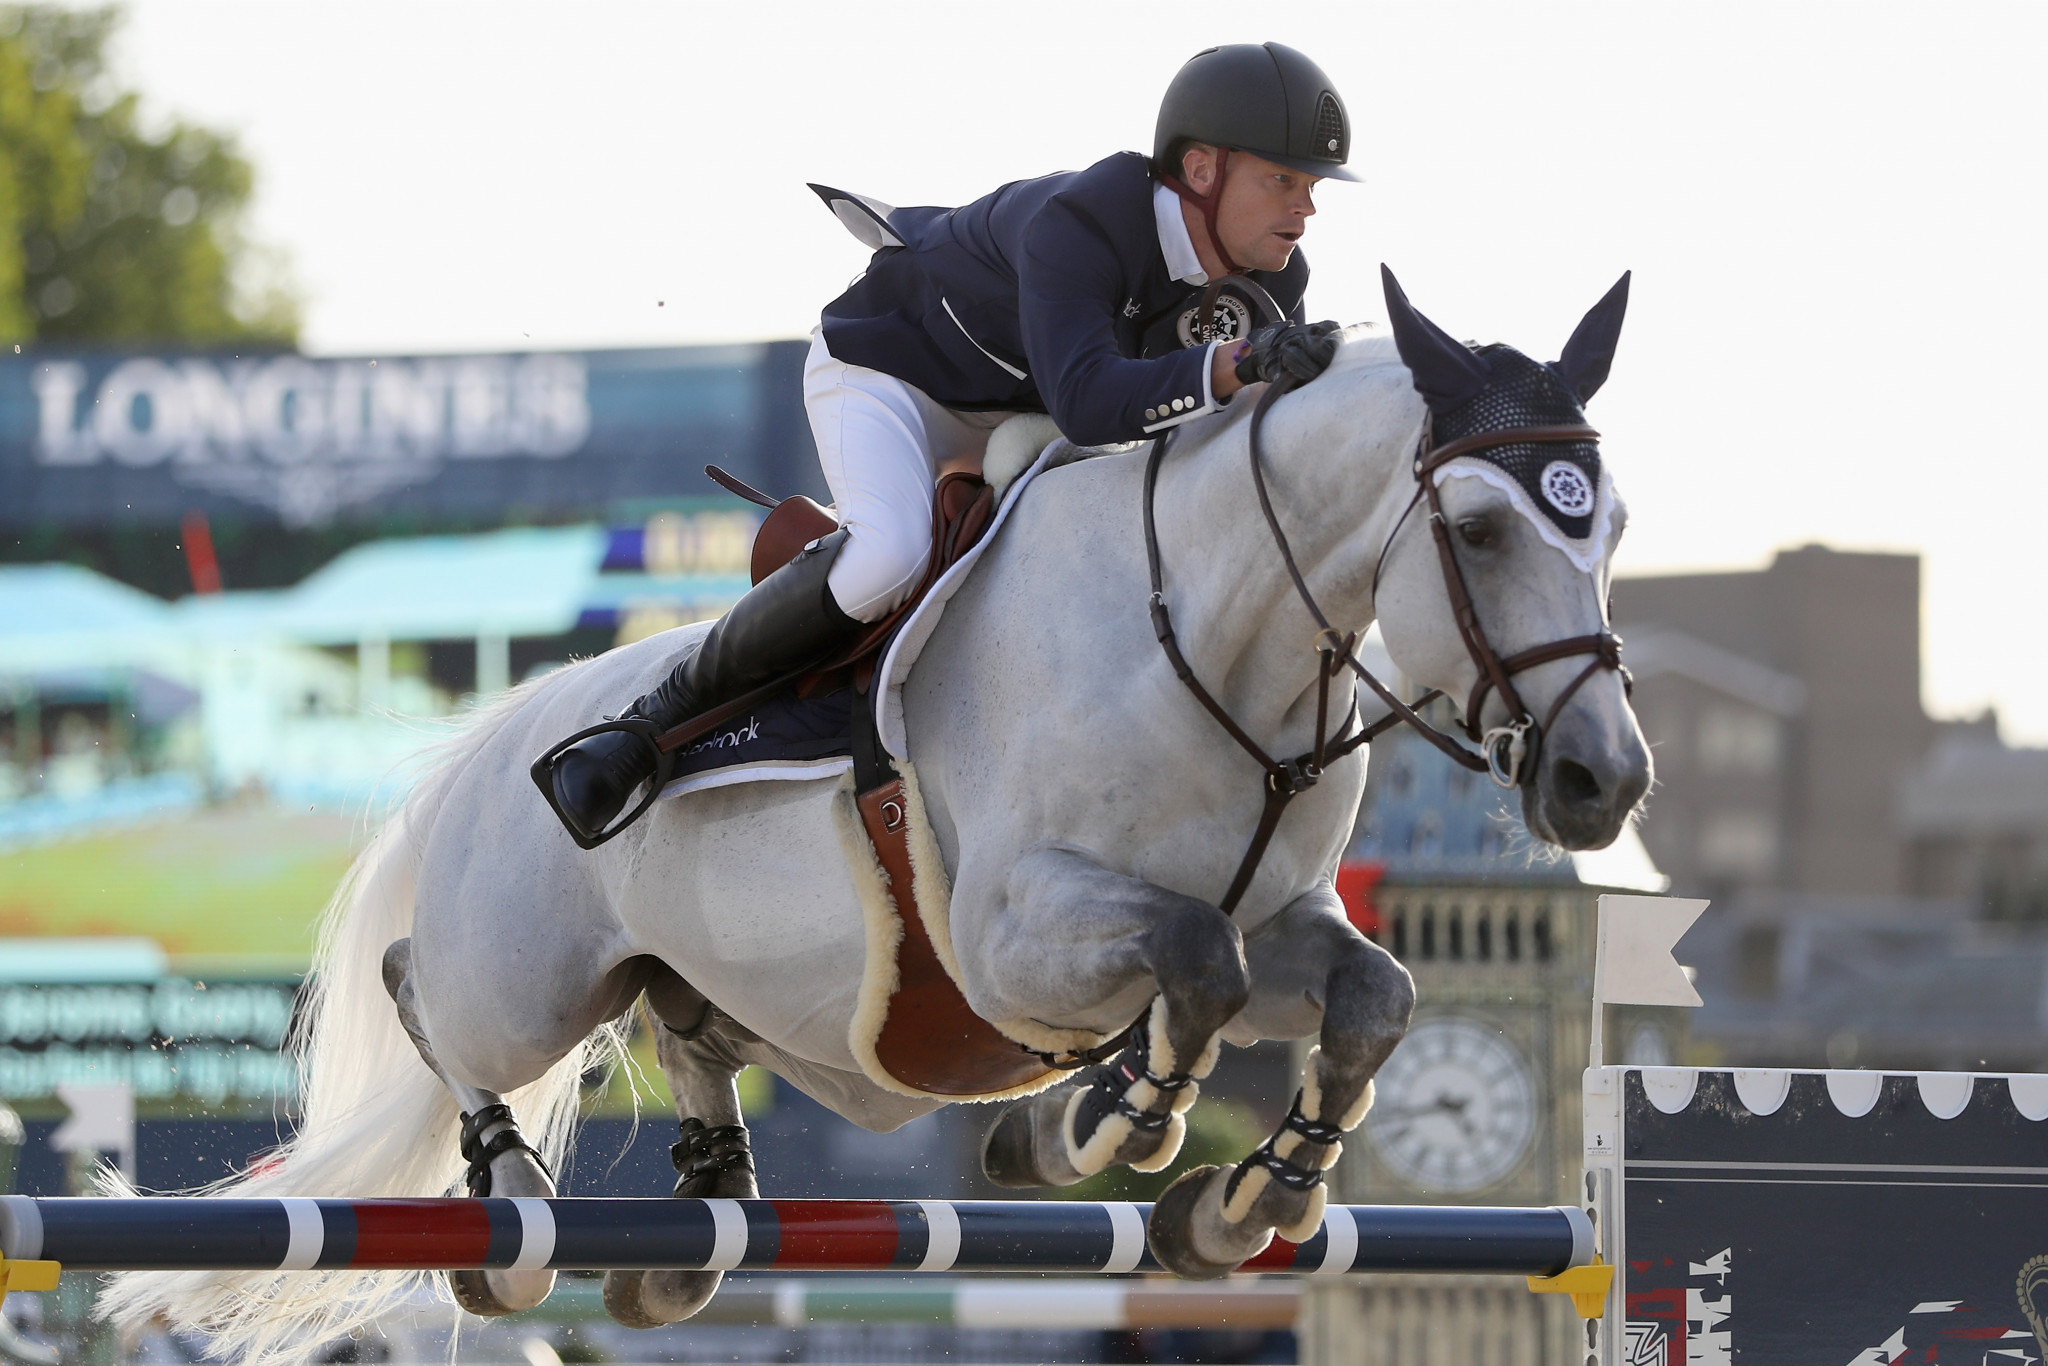 Second stop of Longines Global Champions Tour to begin in Mexico City 